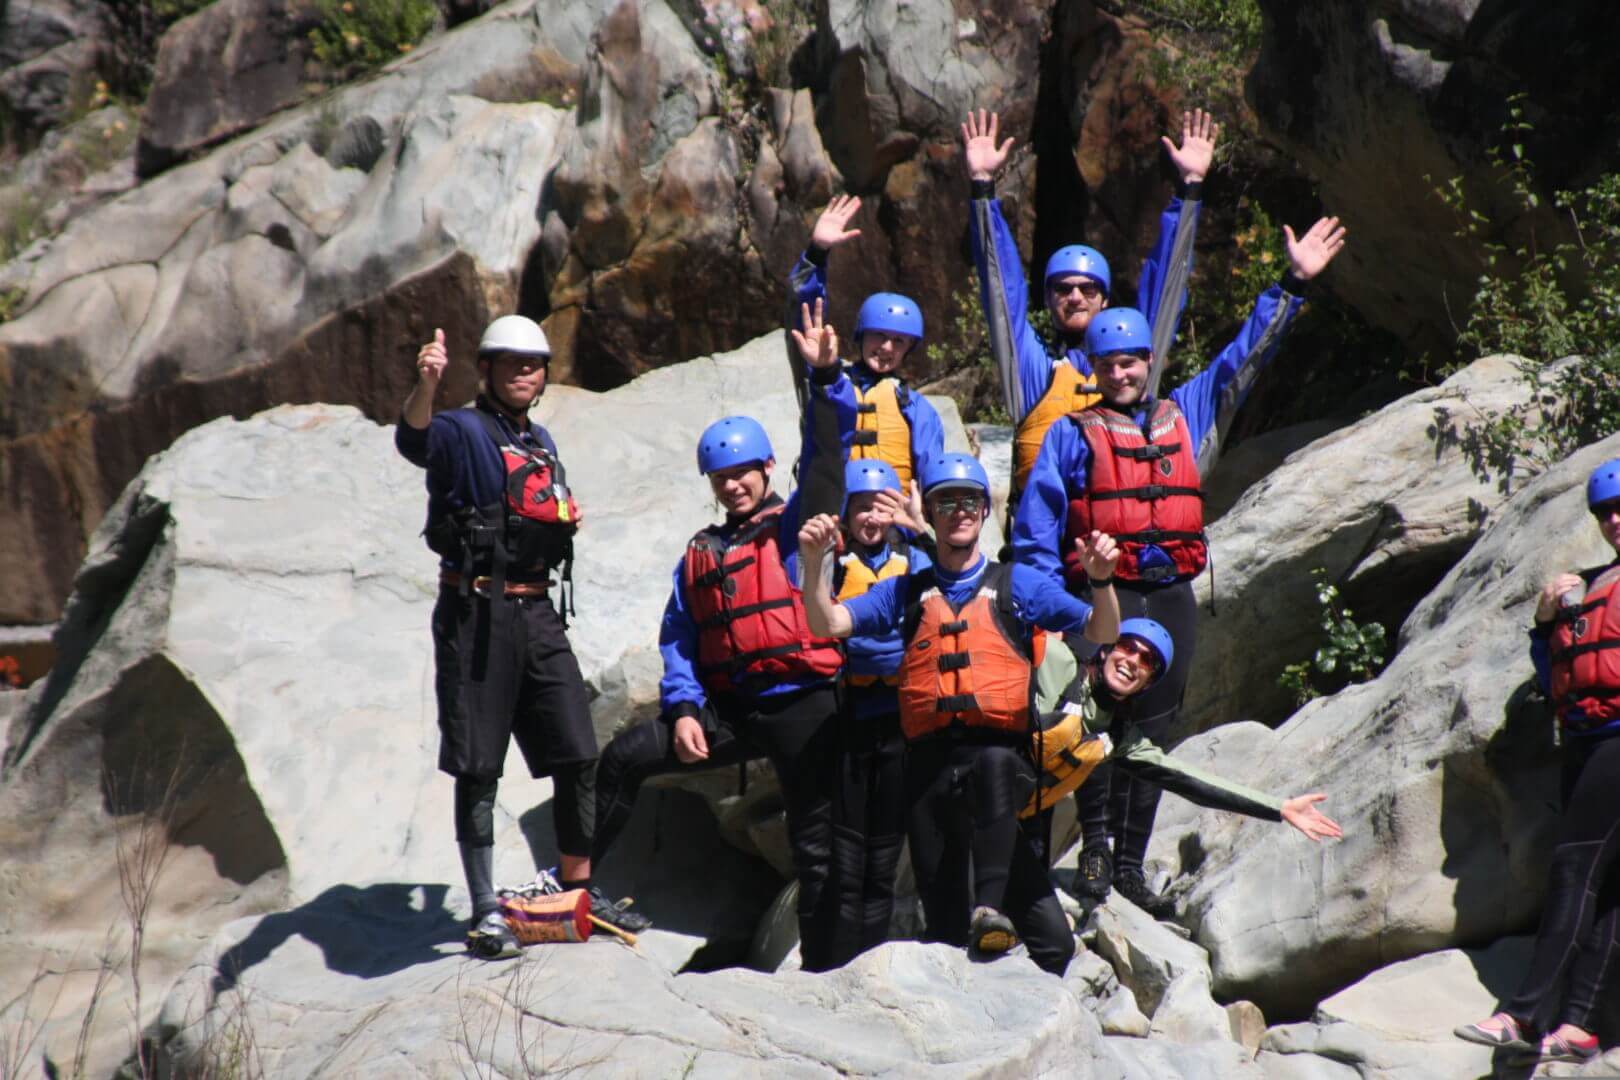 Ivan and his crew excited for more North Fork thrills